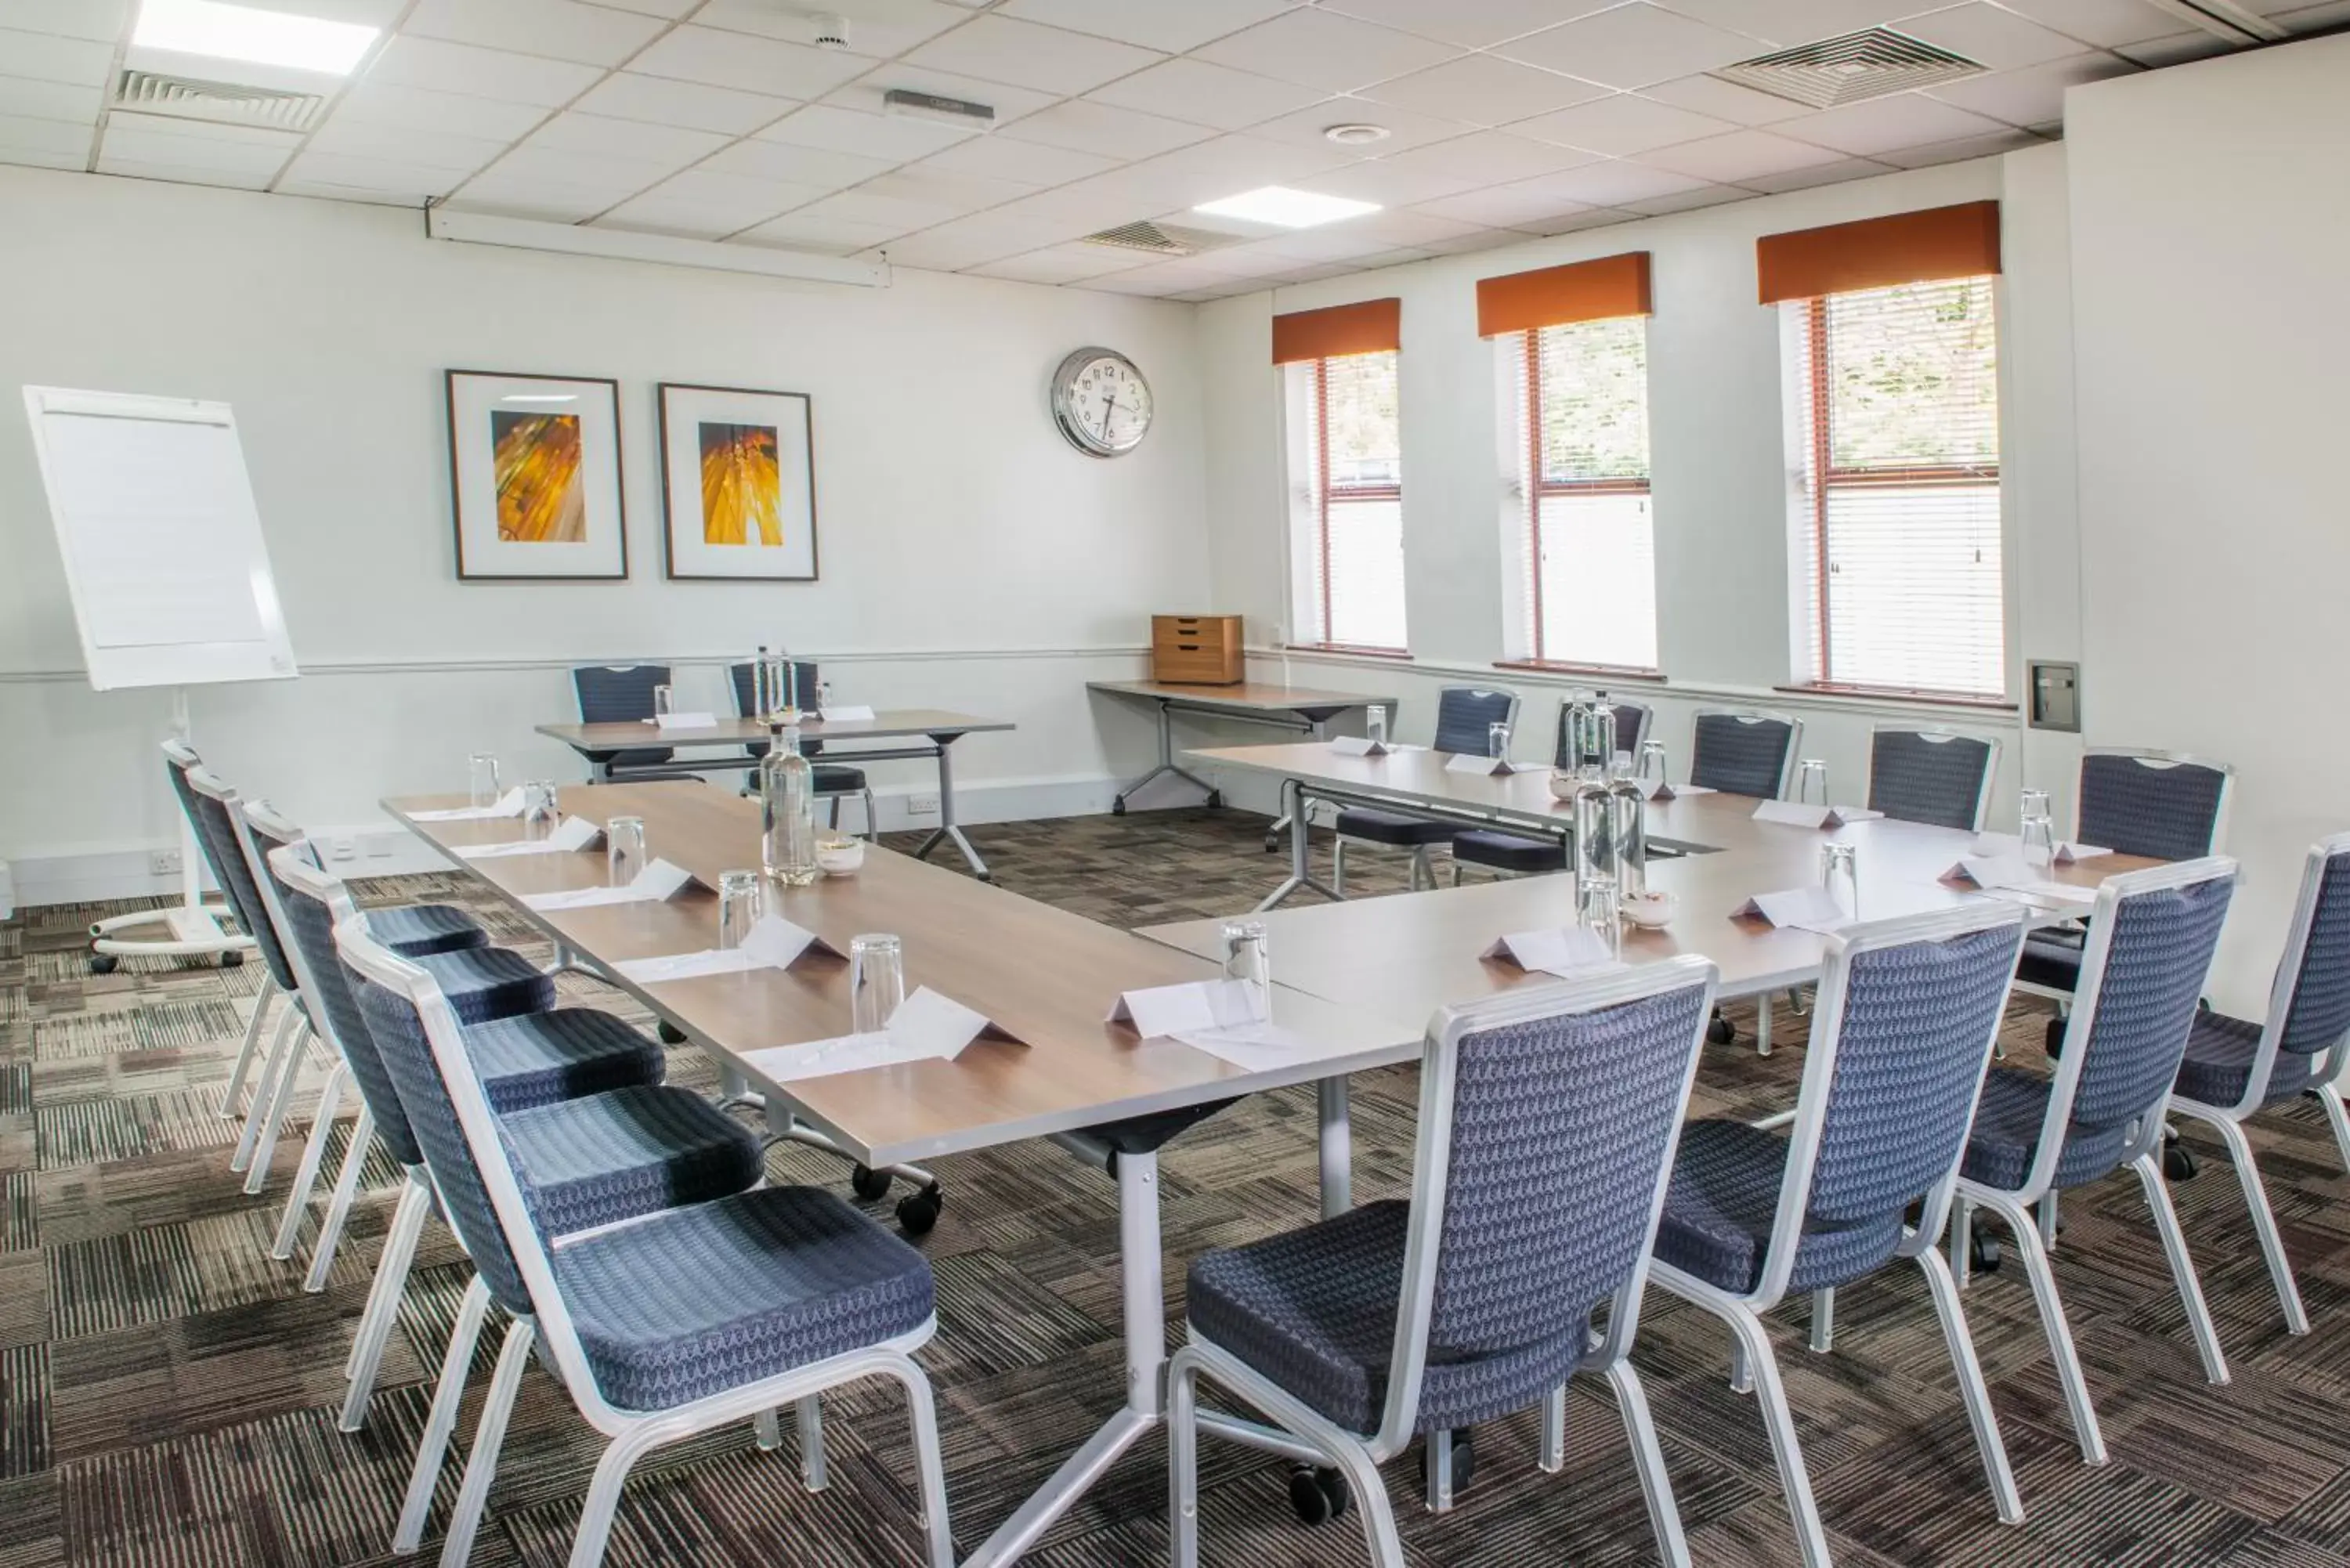 Business facilities in The Orchard Hotel & Restaurant